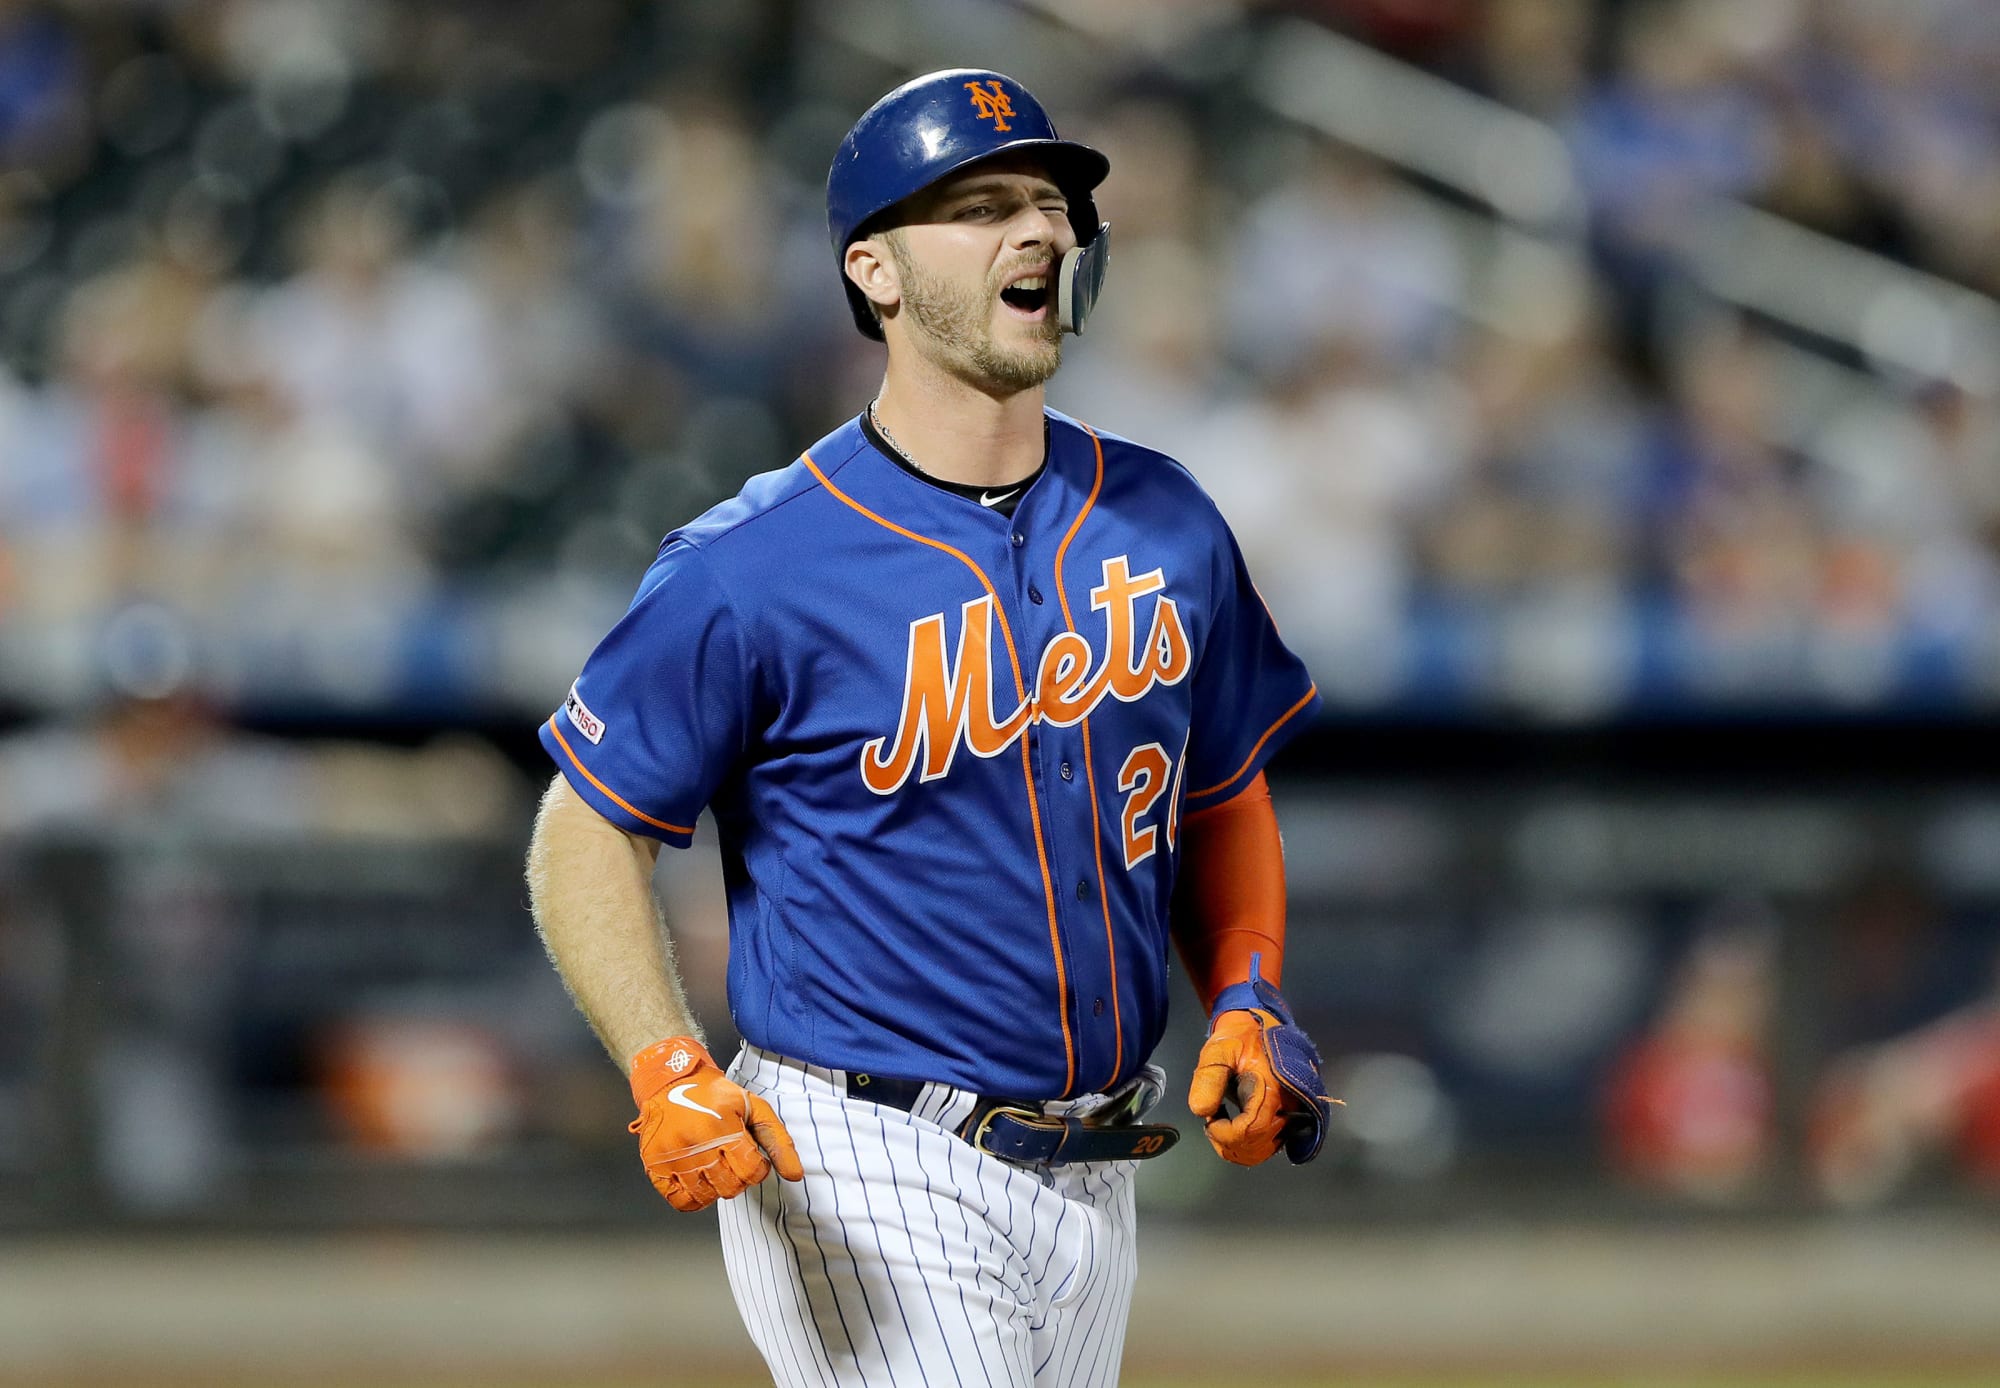 Mets rookie Pete Alonso faces tough first base AllStar competition